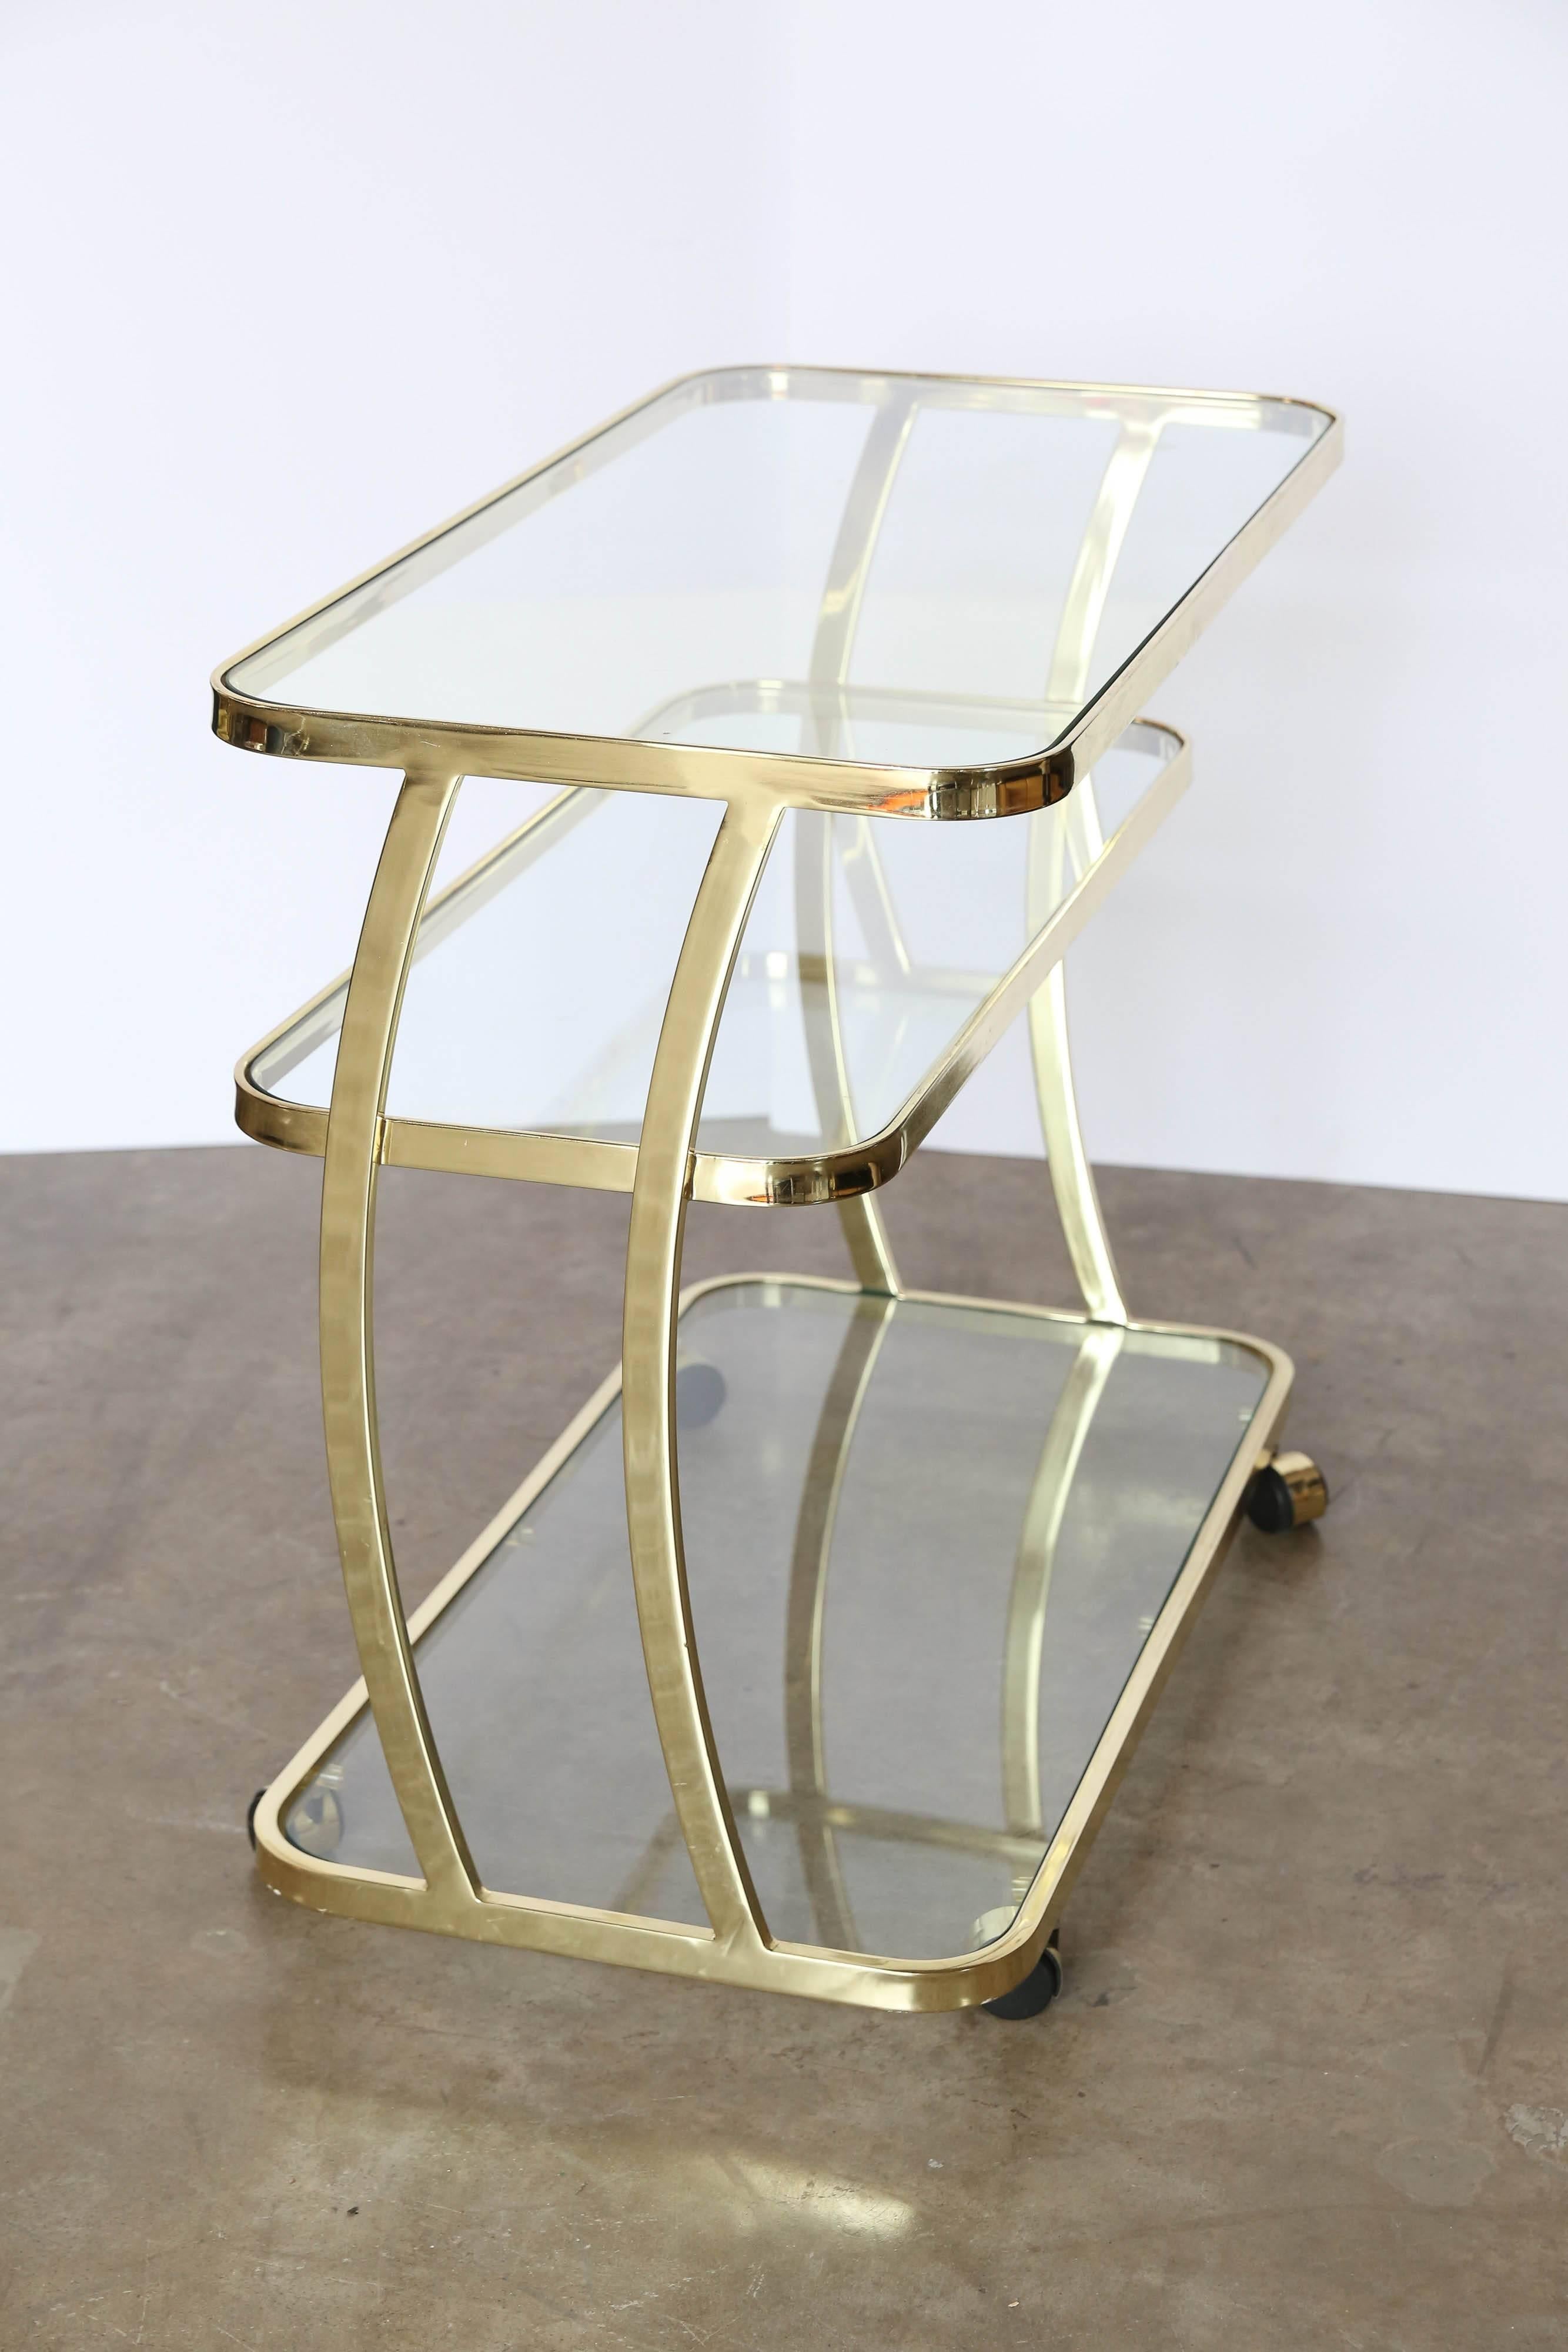 American Dia Three-Tier Brass and Glass Bar, Drinks, Tea or Service Cart /Trolley